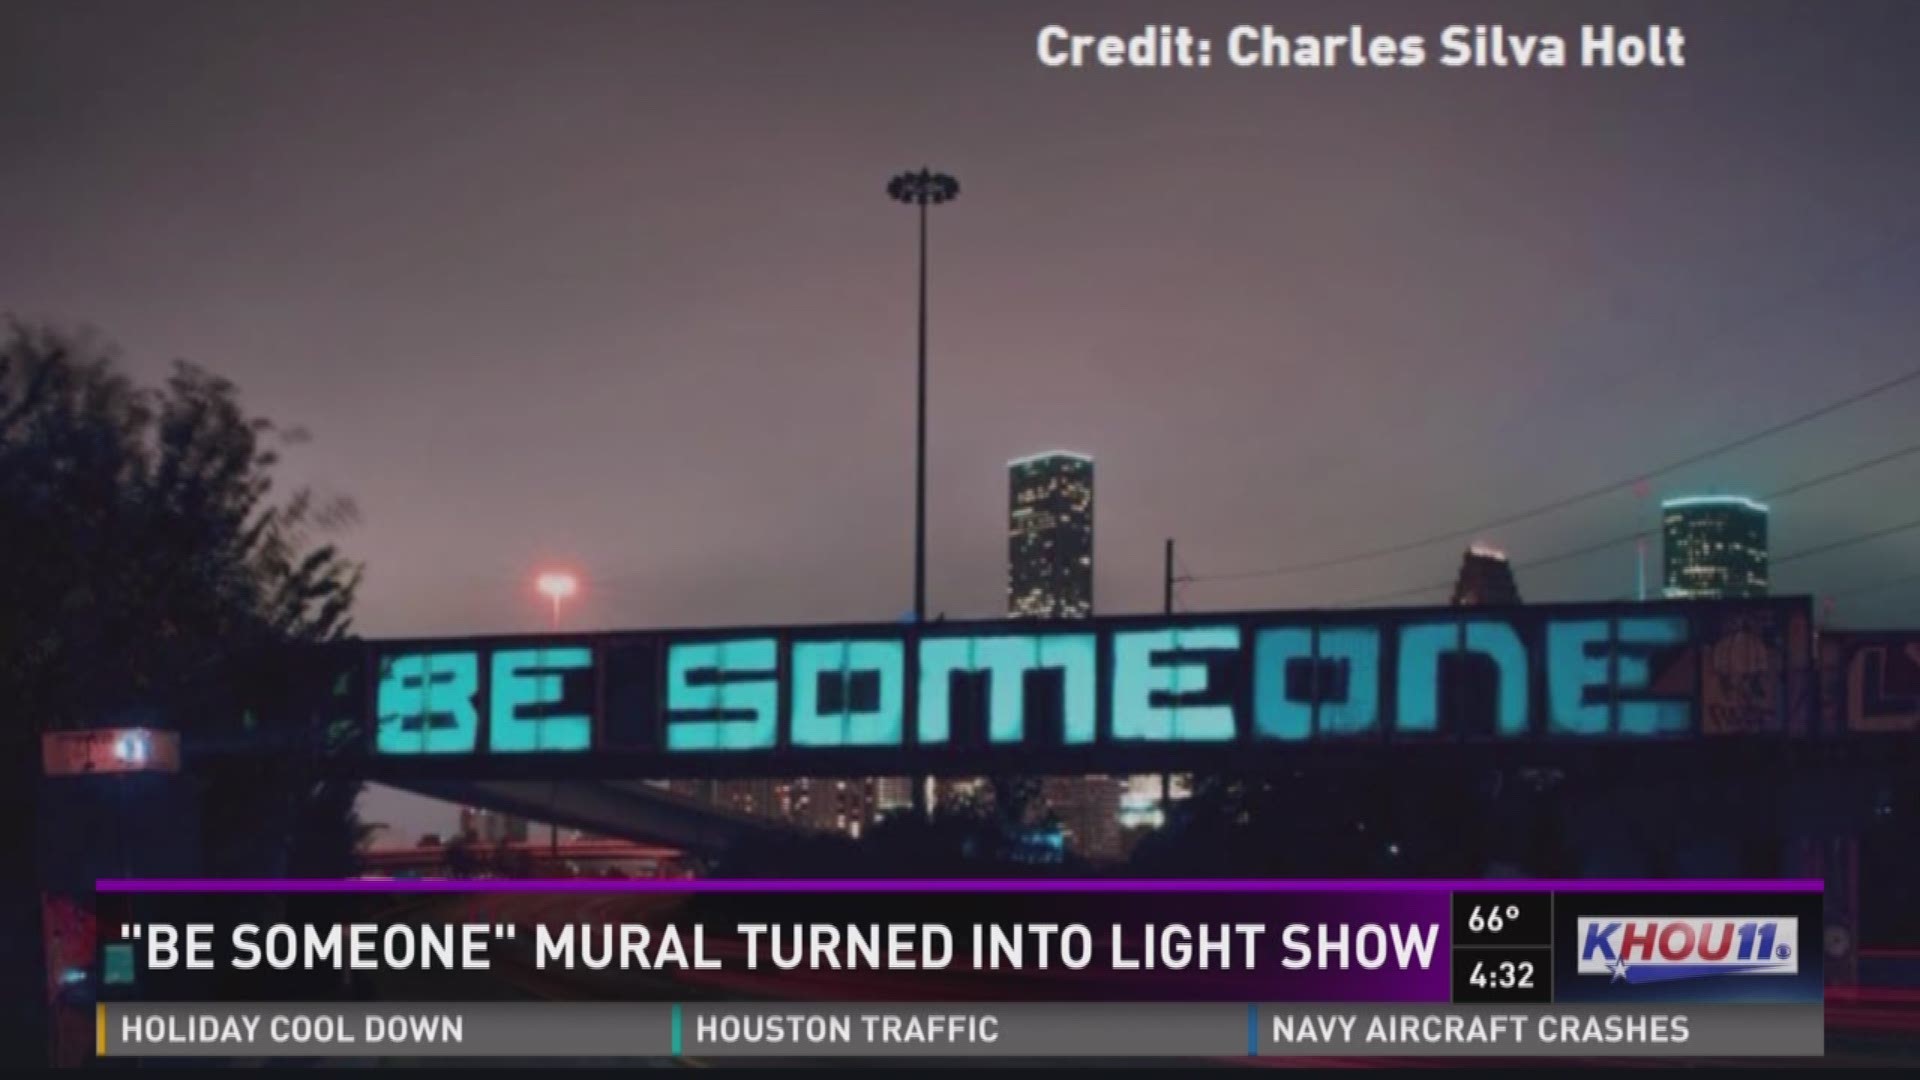 The famous "Be Someone" graffiti bridge was lit up with the help of the folks at the Input/Output Digital lab. They brought their temporary work of art to life using a generator, two projectors and a laptop computer.